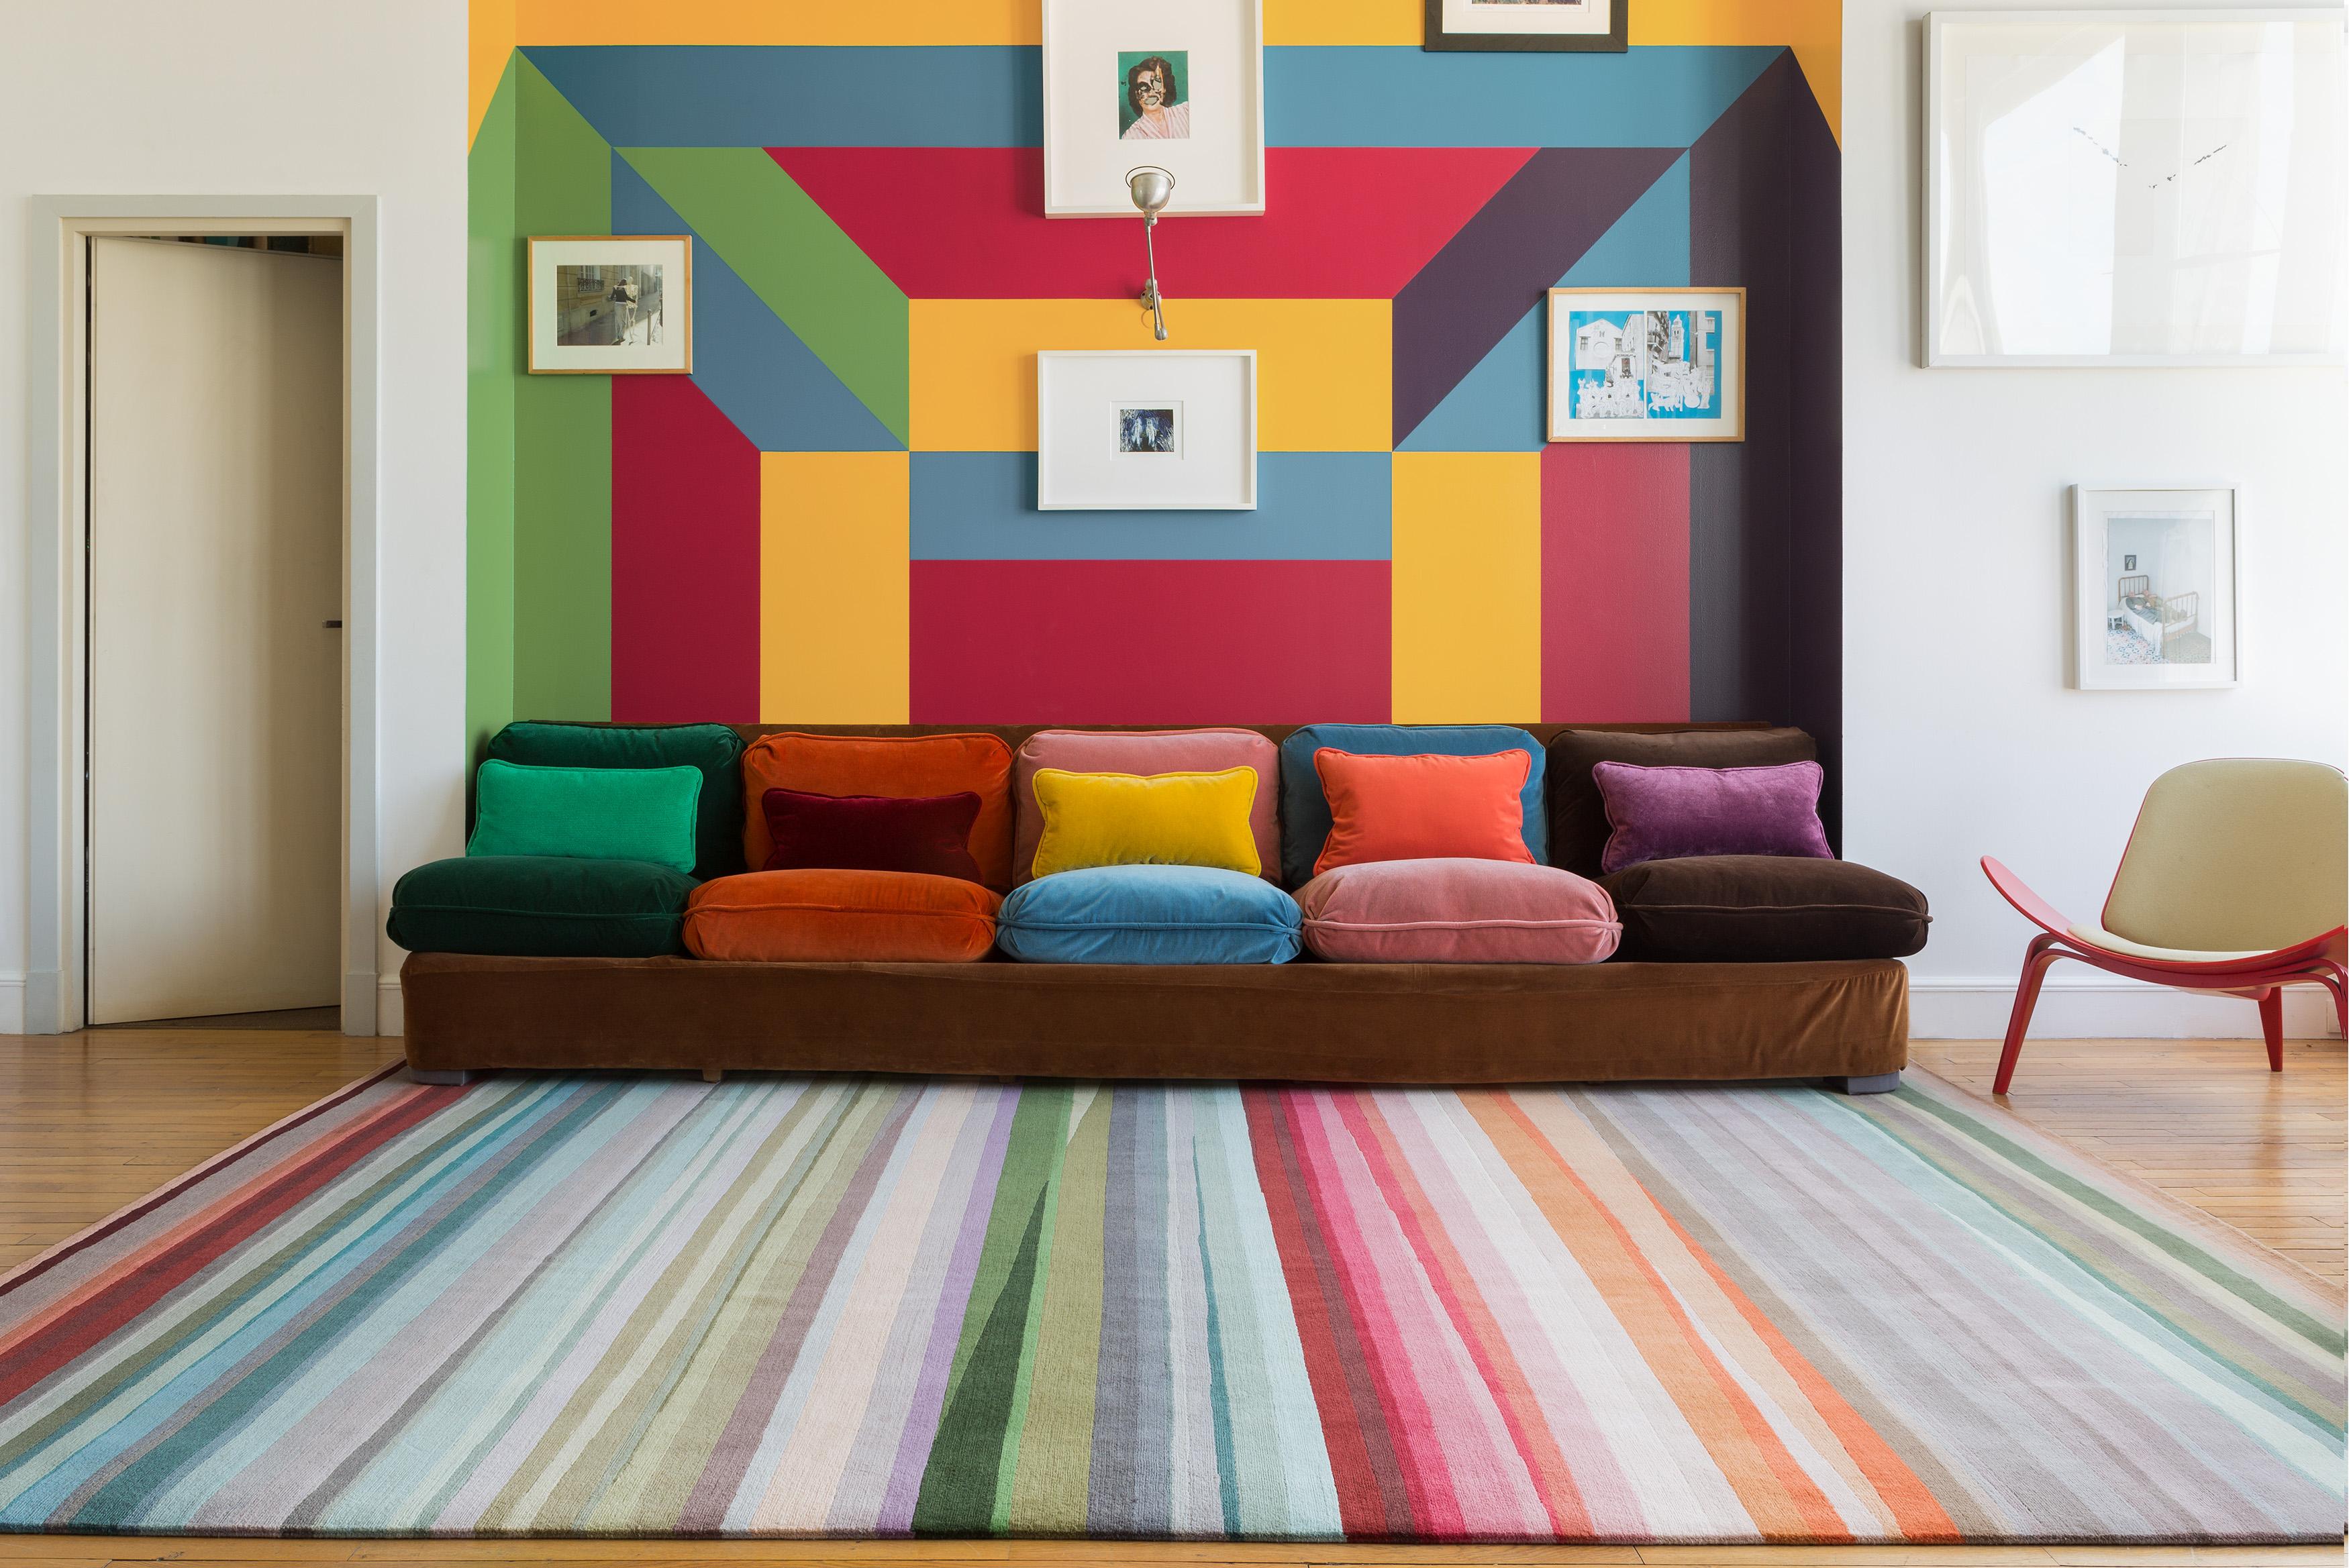 The Festival rug is instantly recognizable as the work of Sir Paul Smith. The Classic stripe is given a contemporary twist with intersections and overlays, seamlessly flowing from one color group to the next. The impactful and uplifting design